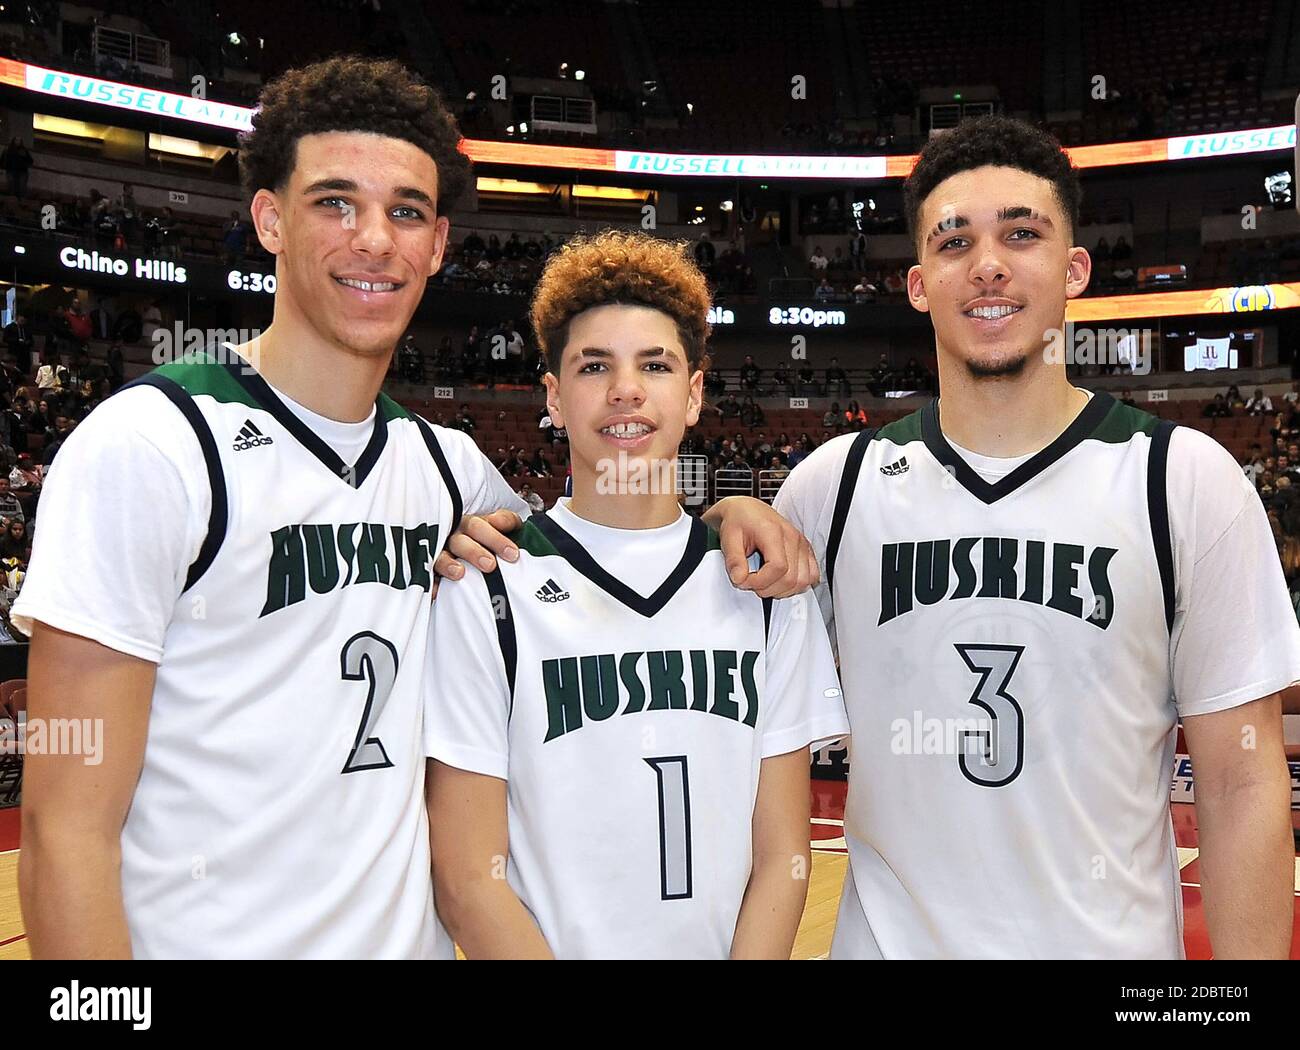 Lonzo, LaMelo, LiAngelo, and the Greatest High School Basketball